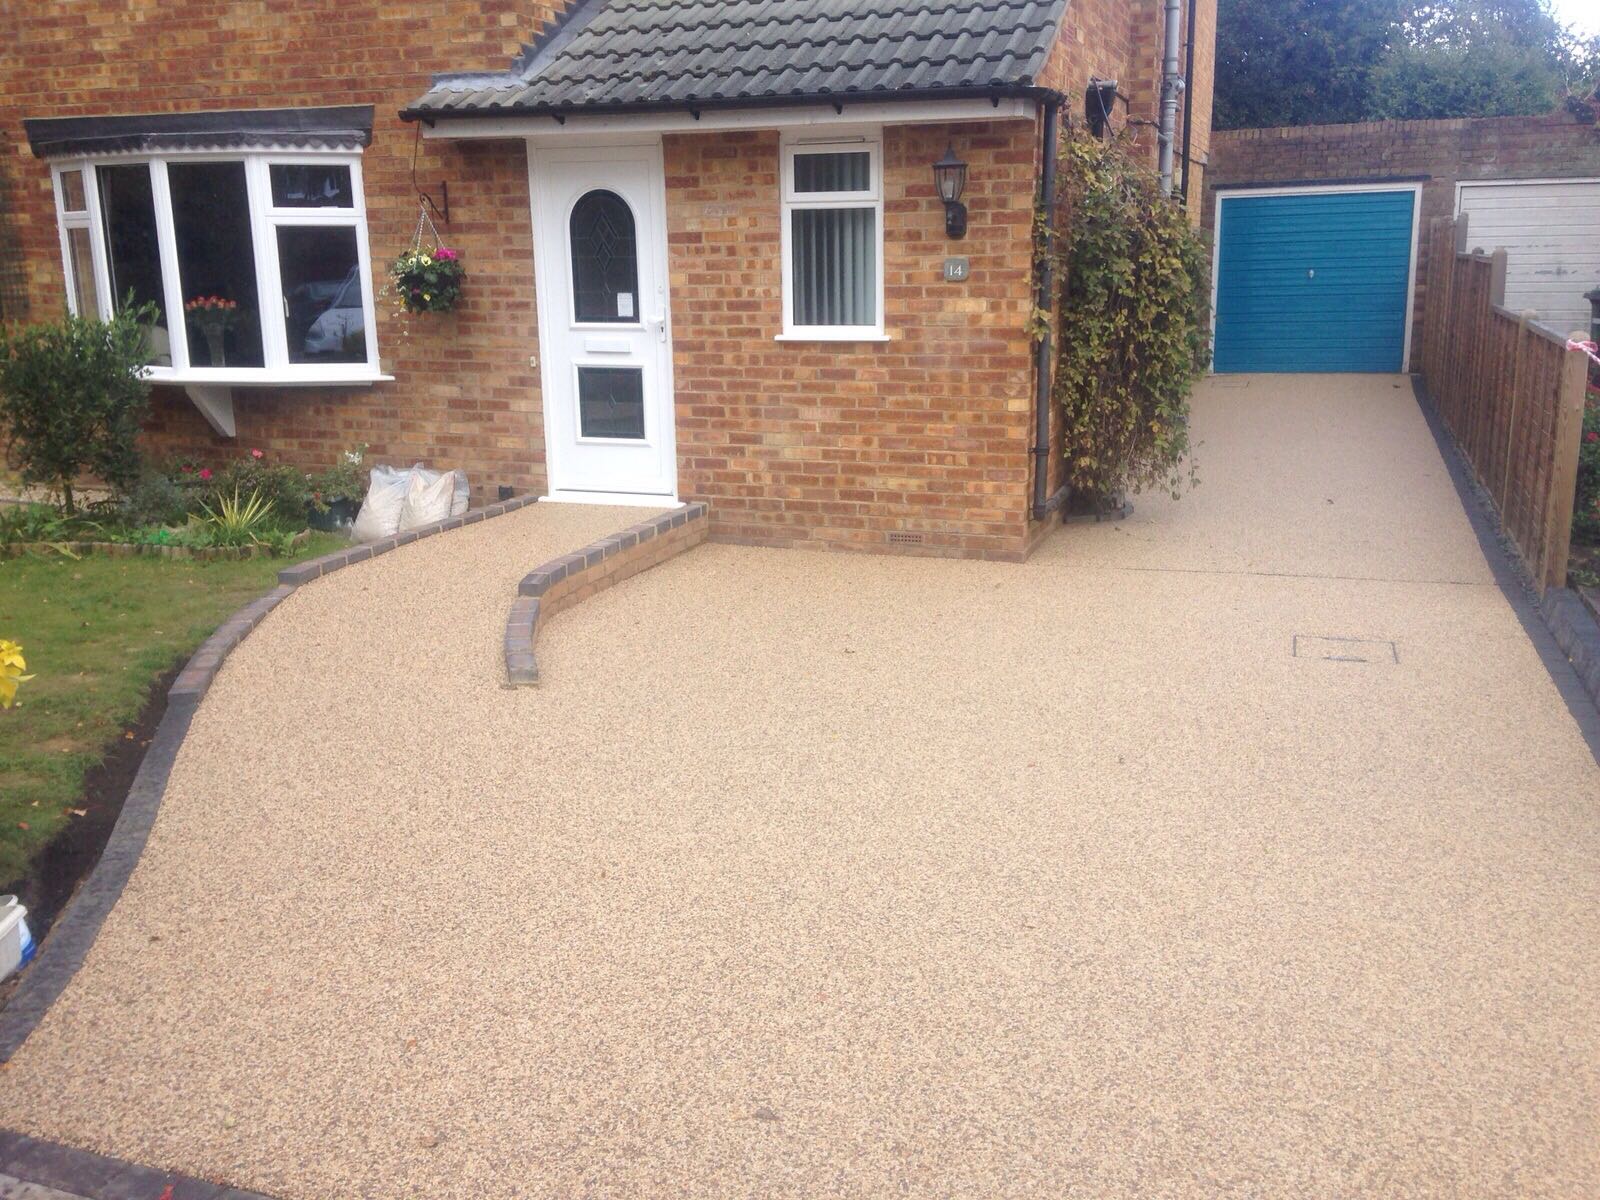 Pavecraft Resin Bond Driveway Completed Watford